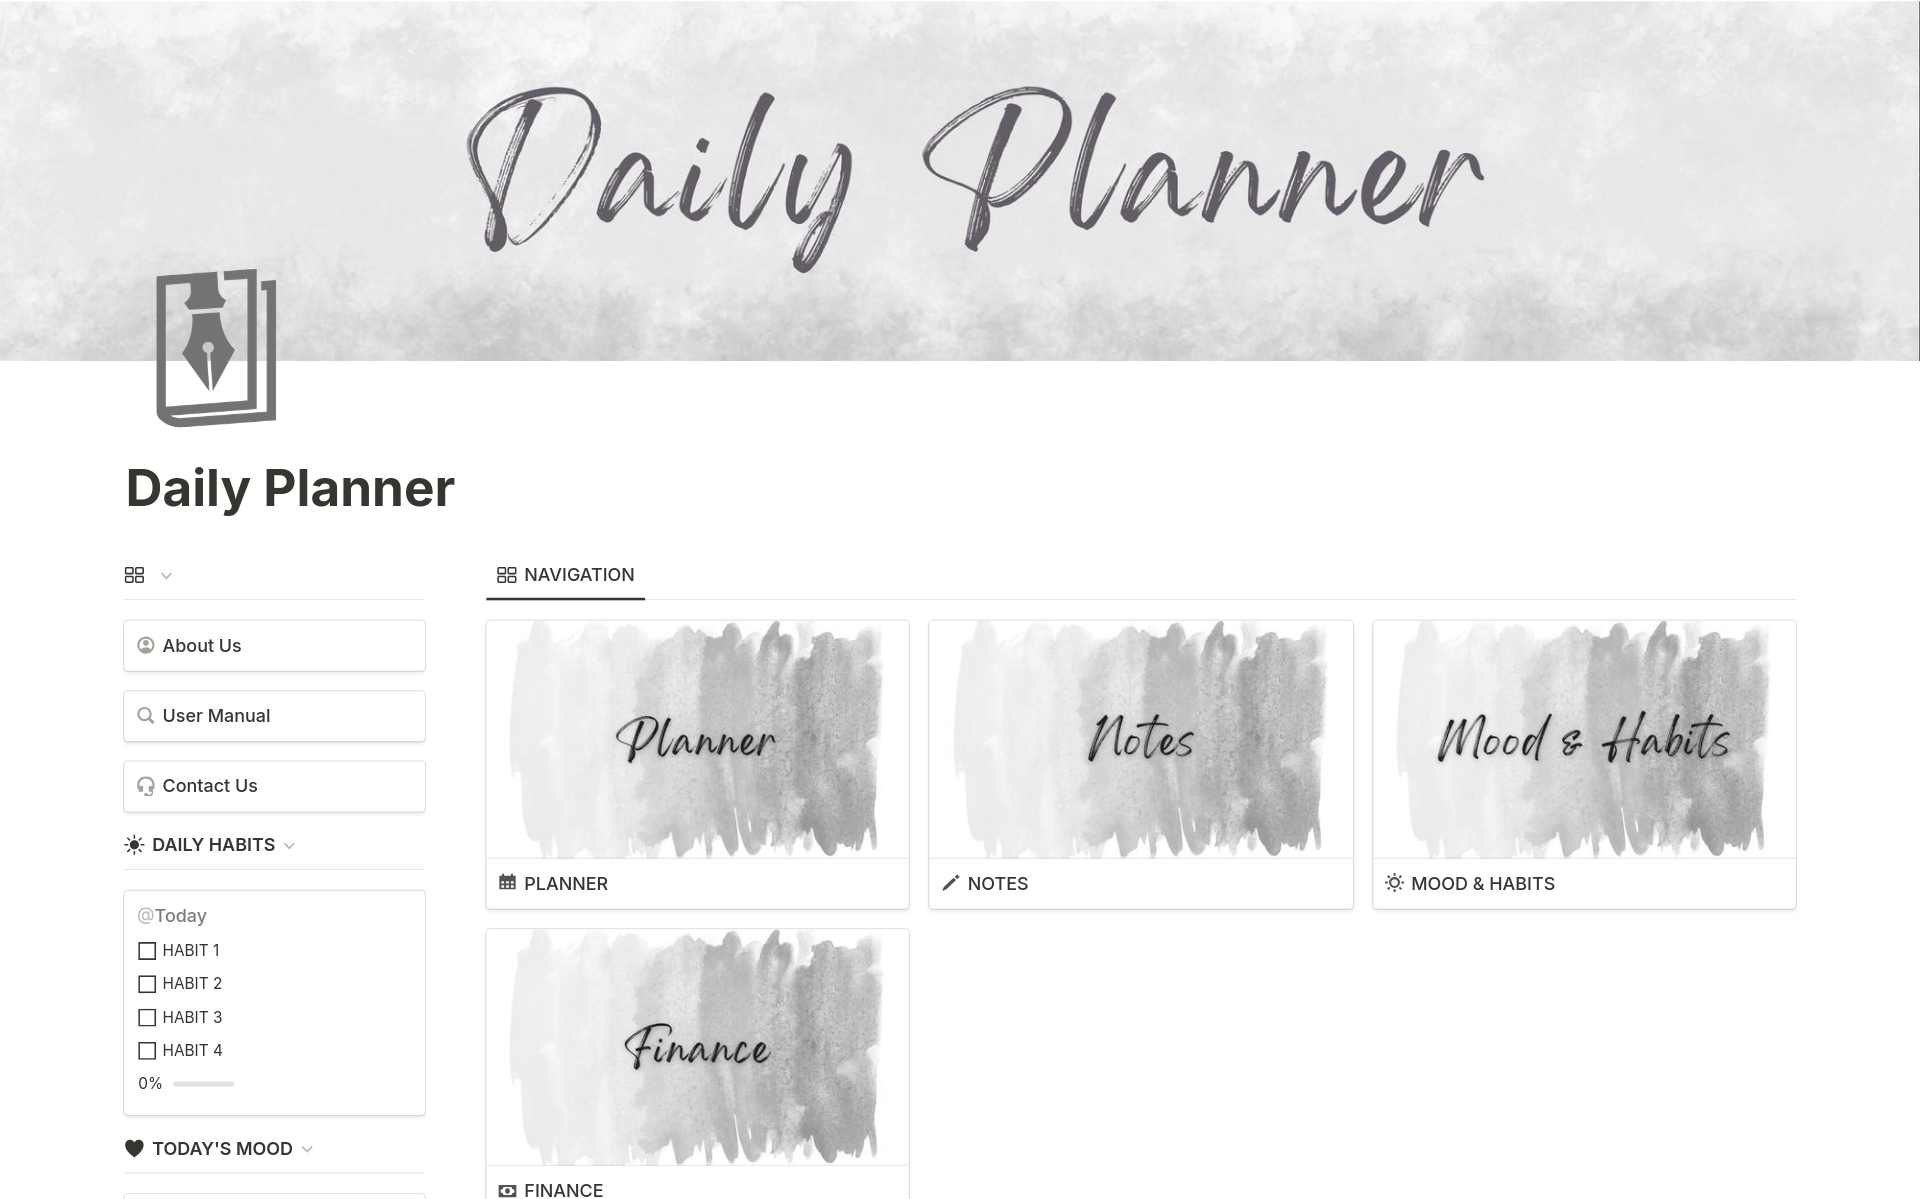 More than just a planner, it's a complete productivity suite designed to help you conquer tasks, achieve goals, and gain control over your life.